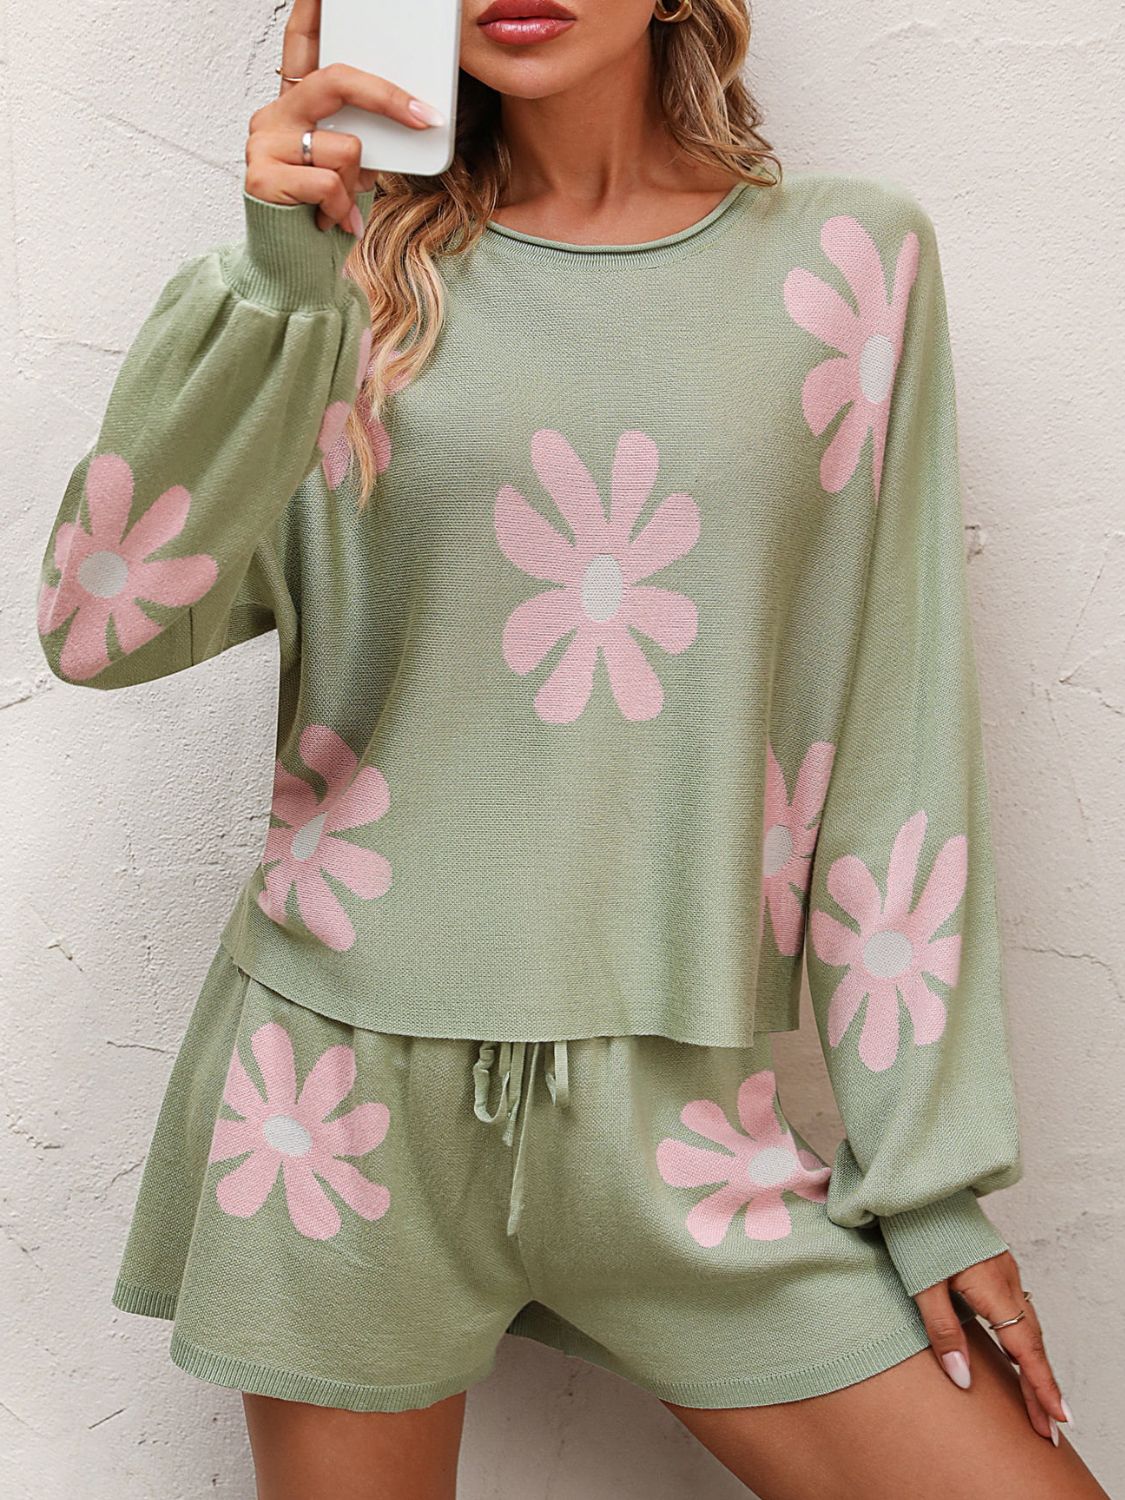 Floral Print Knit Top and Shorts Set choice of colors